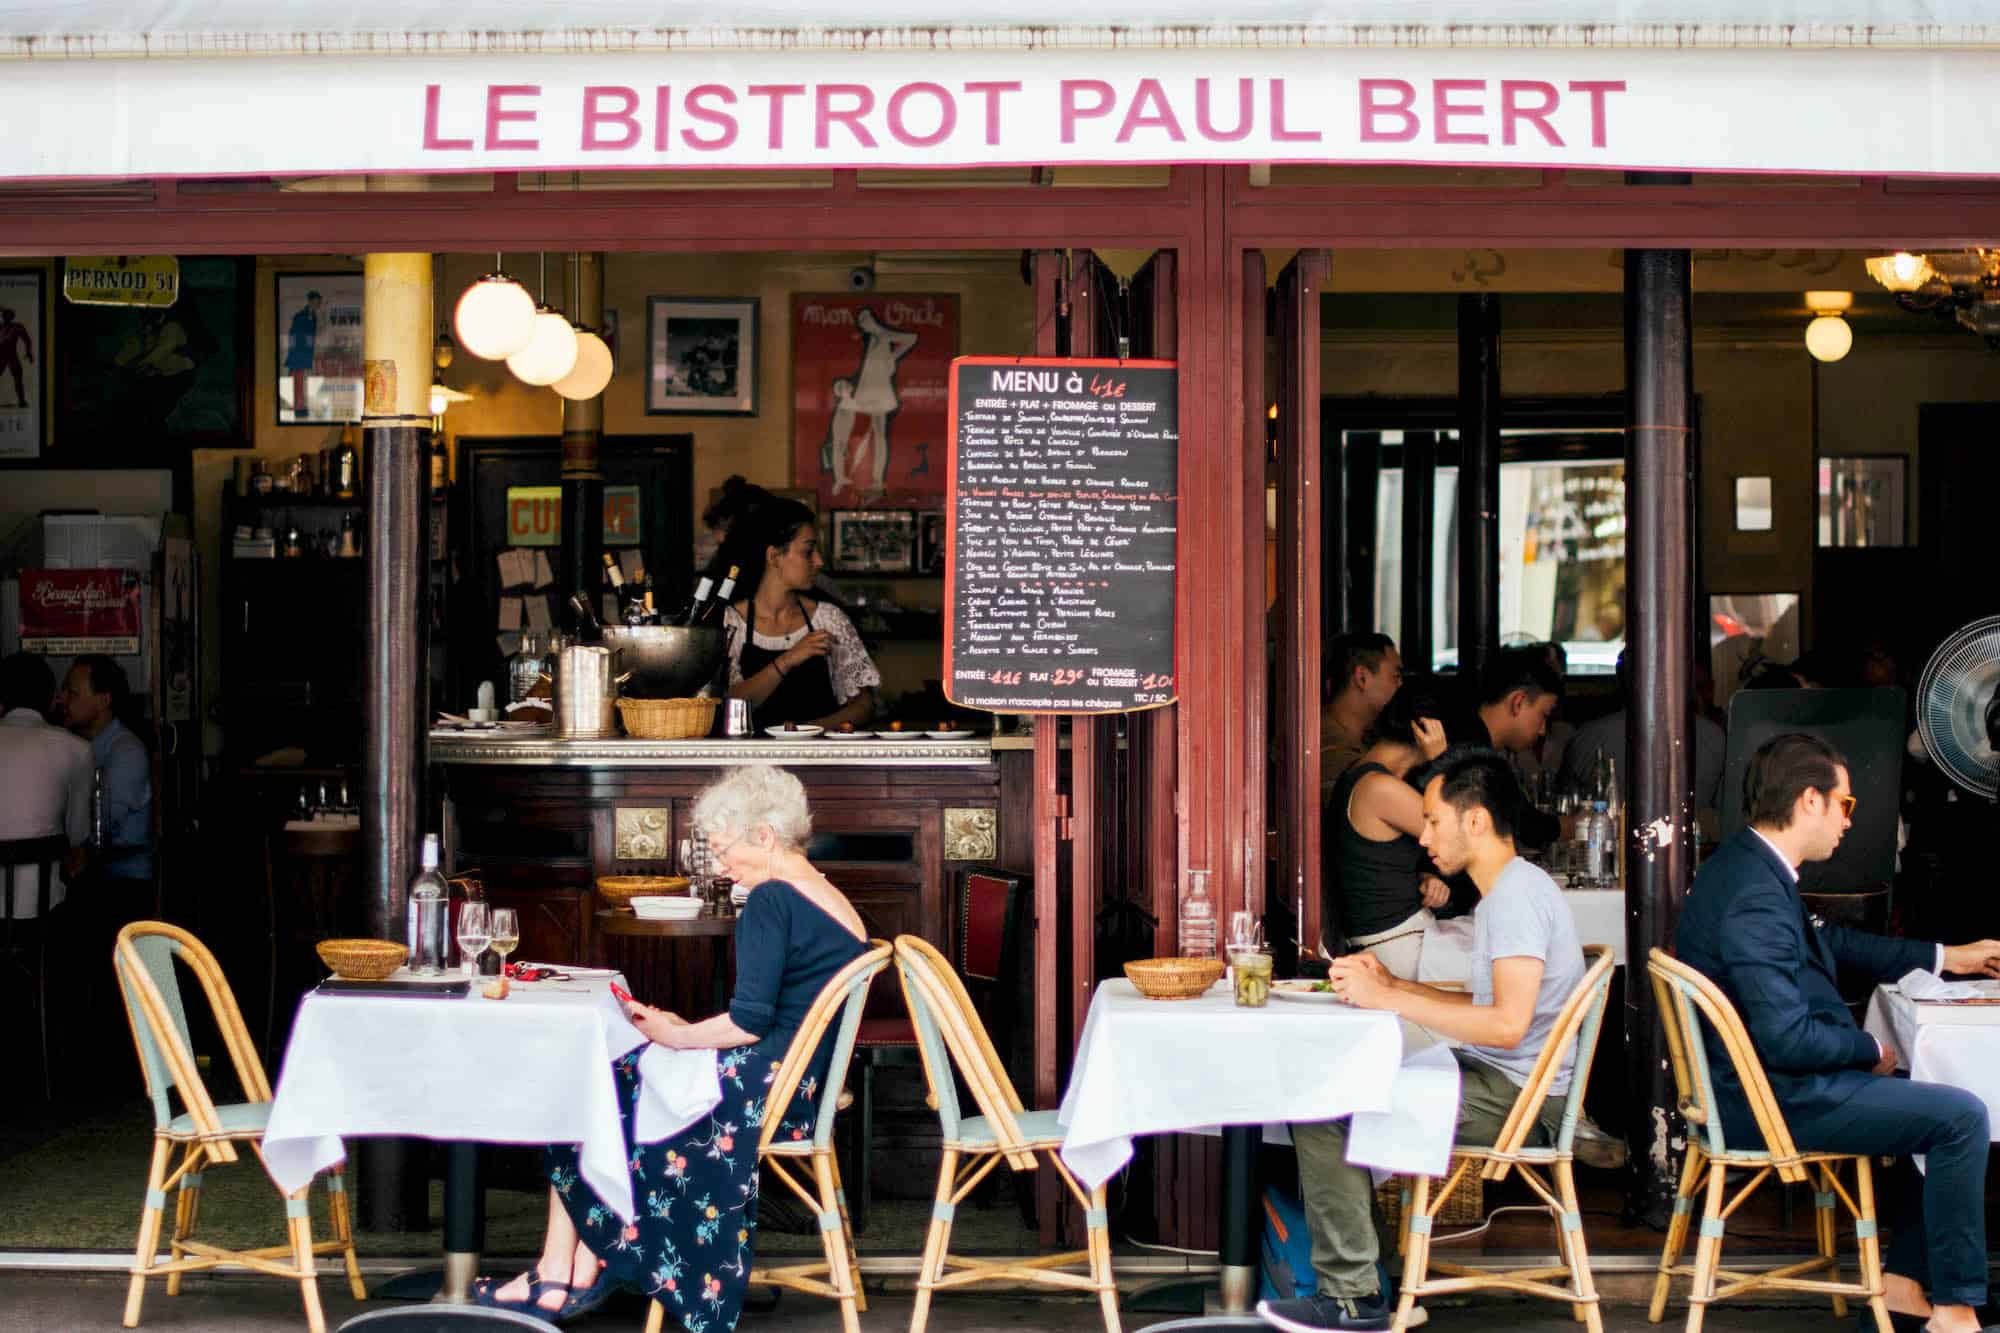 The front of le bistrot paul bert with cane chairs and tables with white table cloth. There are also people dining. 